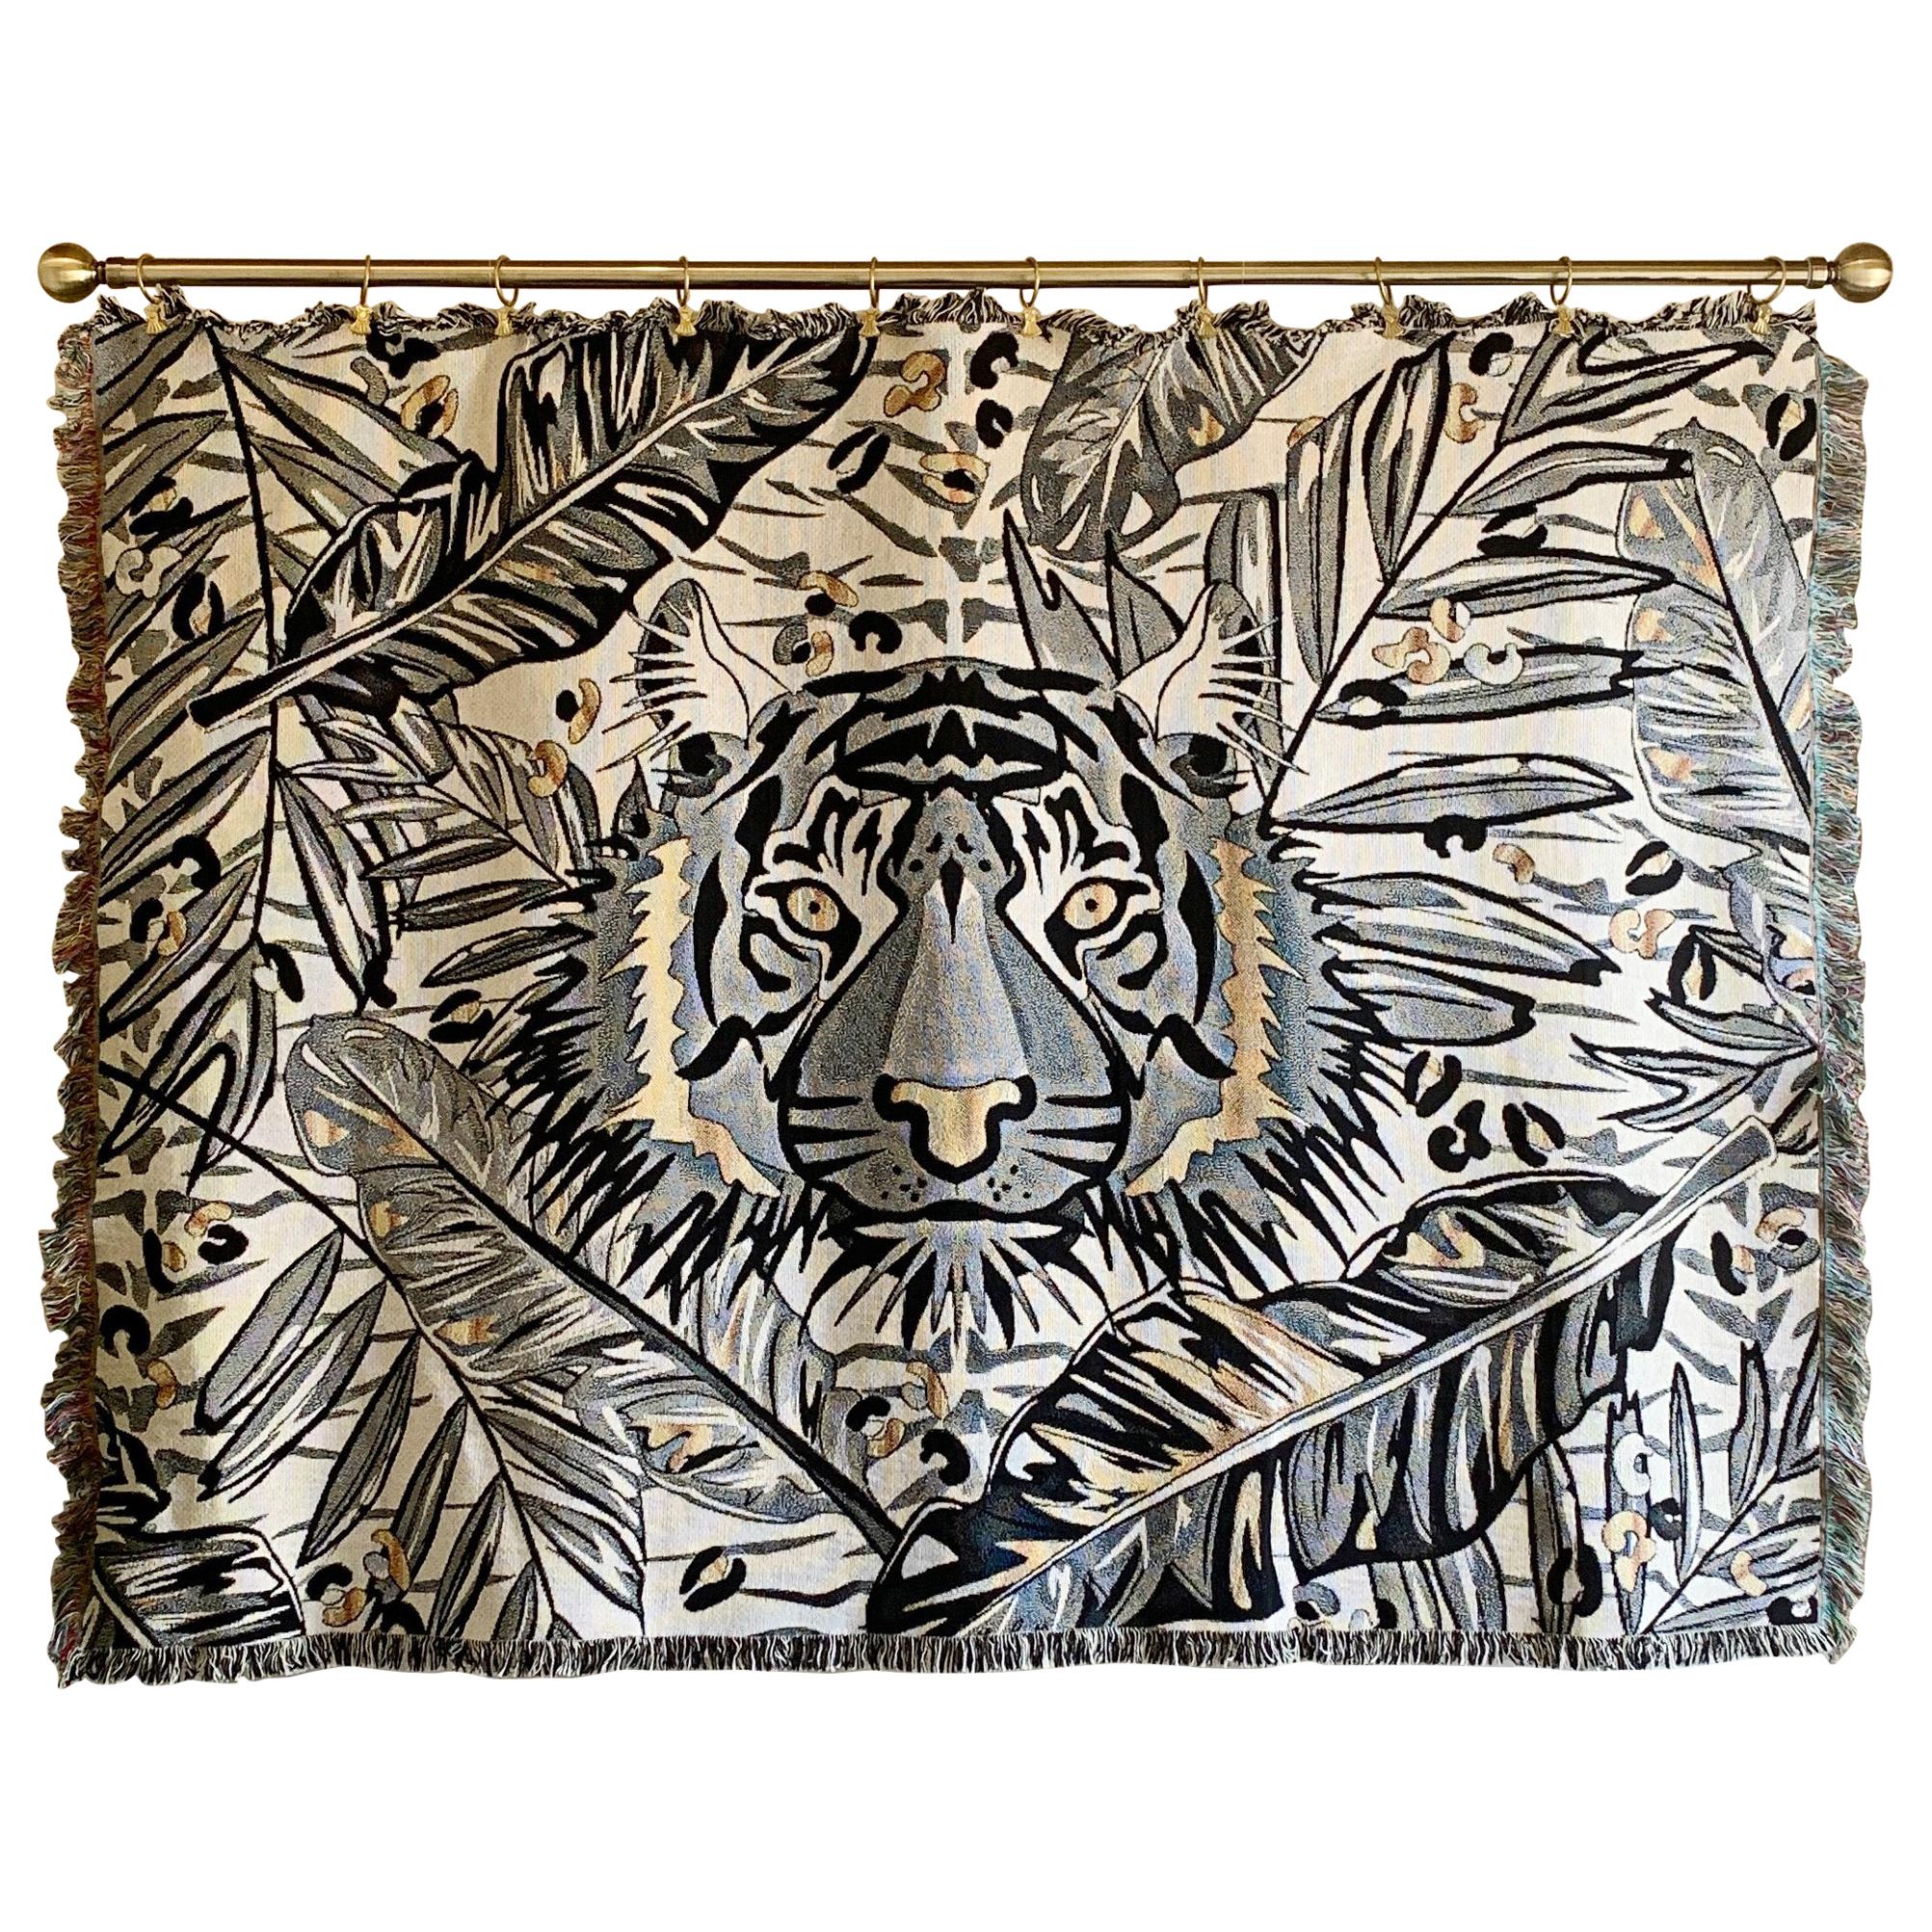 The Tropics Collection 'Tiger' Woven Throw Monochrome and Gold For Sale